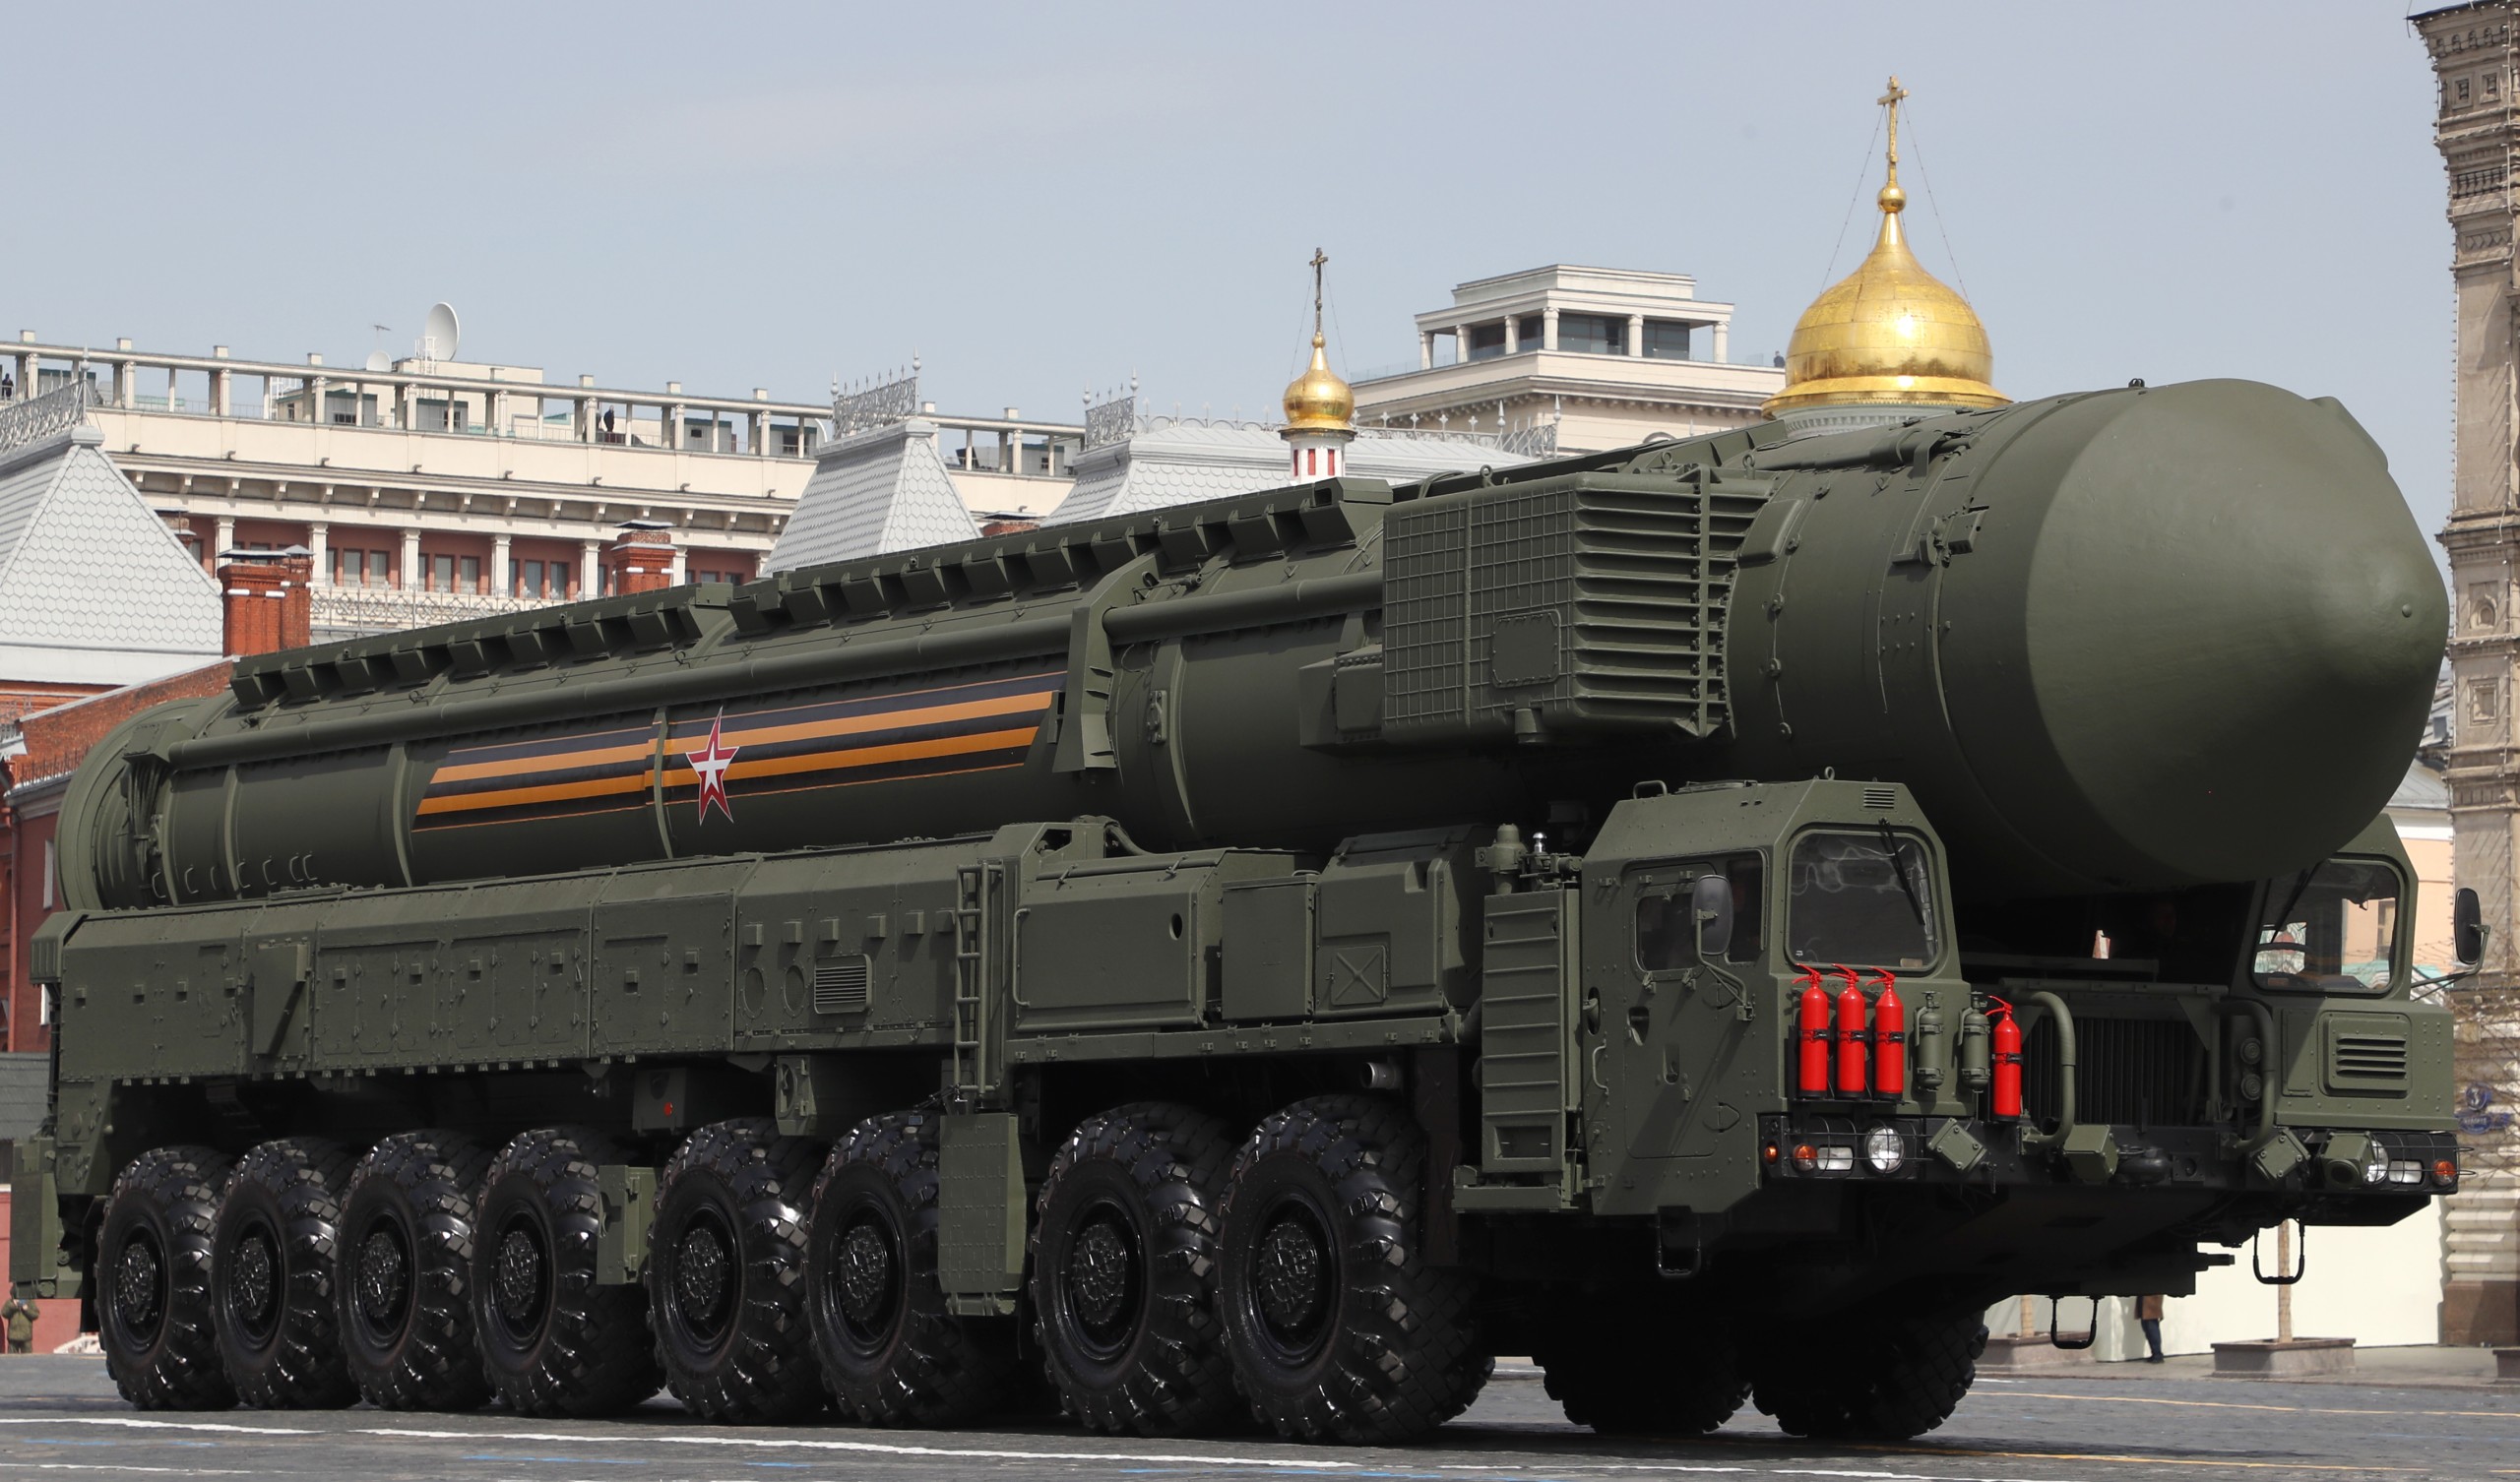 epa09931358 A Russian Yars intercontinental ballistic missile launcher takes part in the Victory Day military parade general rehearsal in the Red Square in Moscow, Russia, 07 May 2022. The Victory Day military parade will take place 09 May 2022 in the Red Square to mark the victory of the Soviet Union over Nazi Germany in World War II.  EPA/MAXIM SHIPENKOV